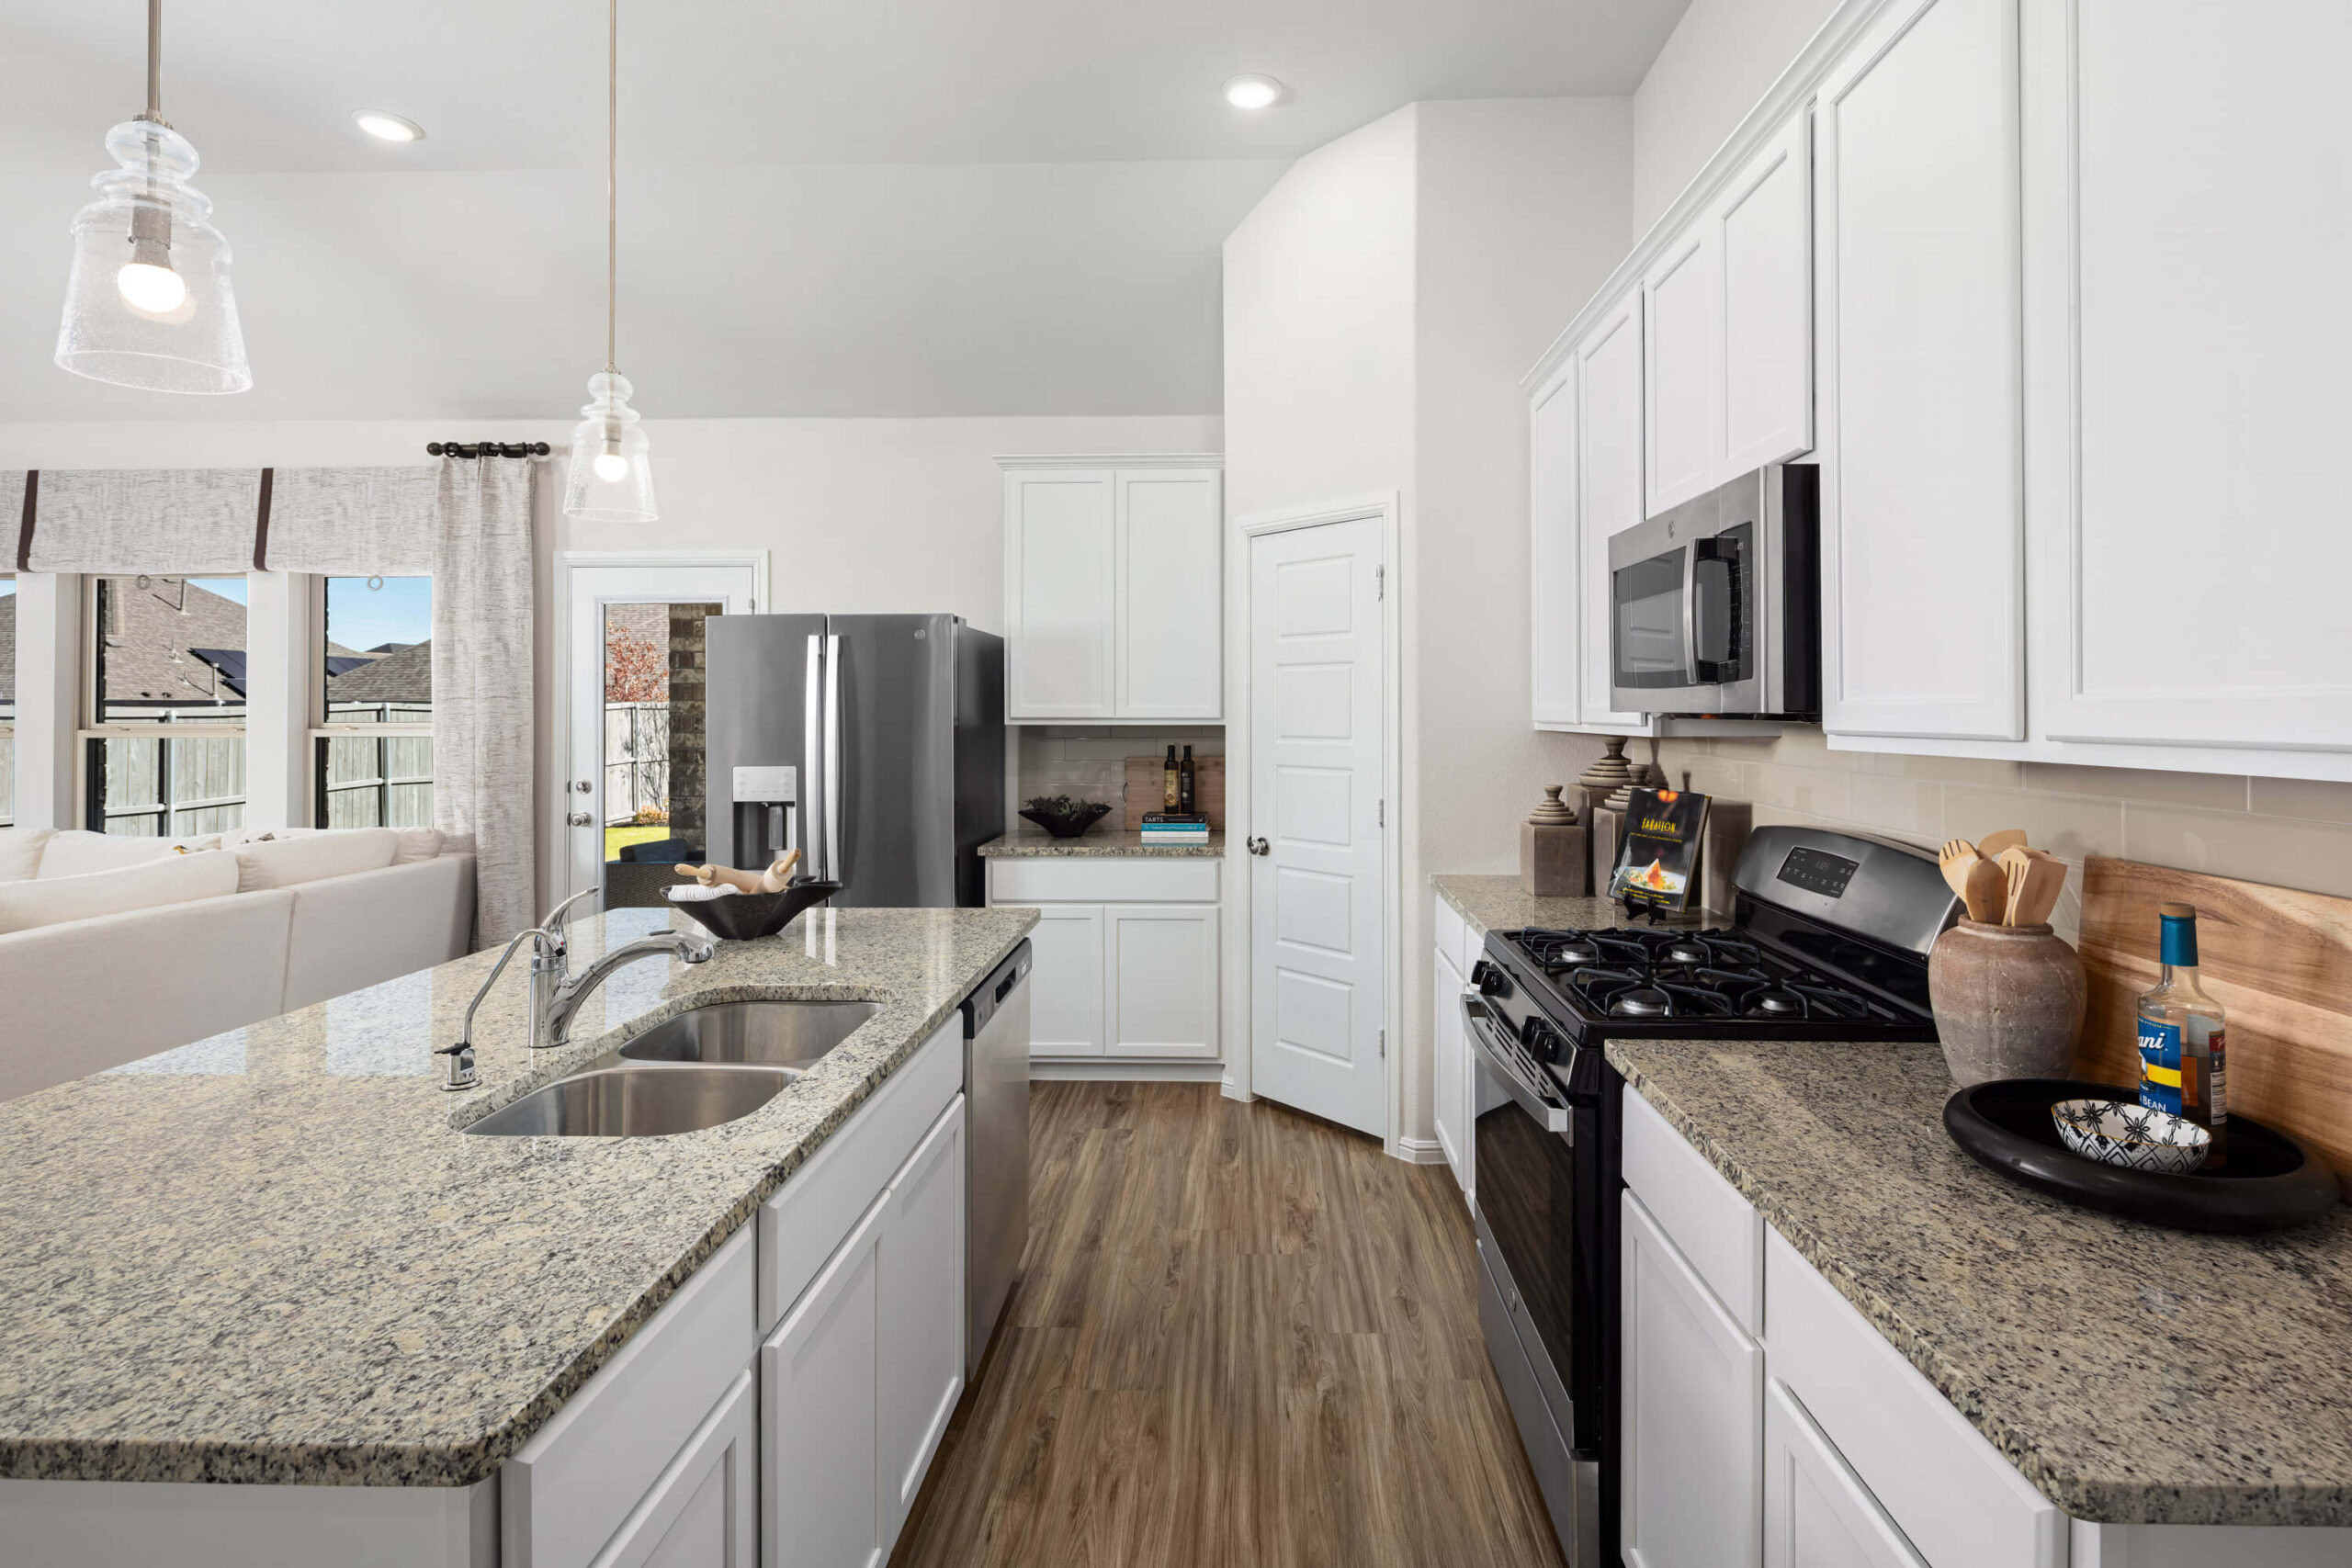 Modern kitchen interior with stainless steel appliances, white cabinetry, and granite countertops in new homes in DFW.